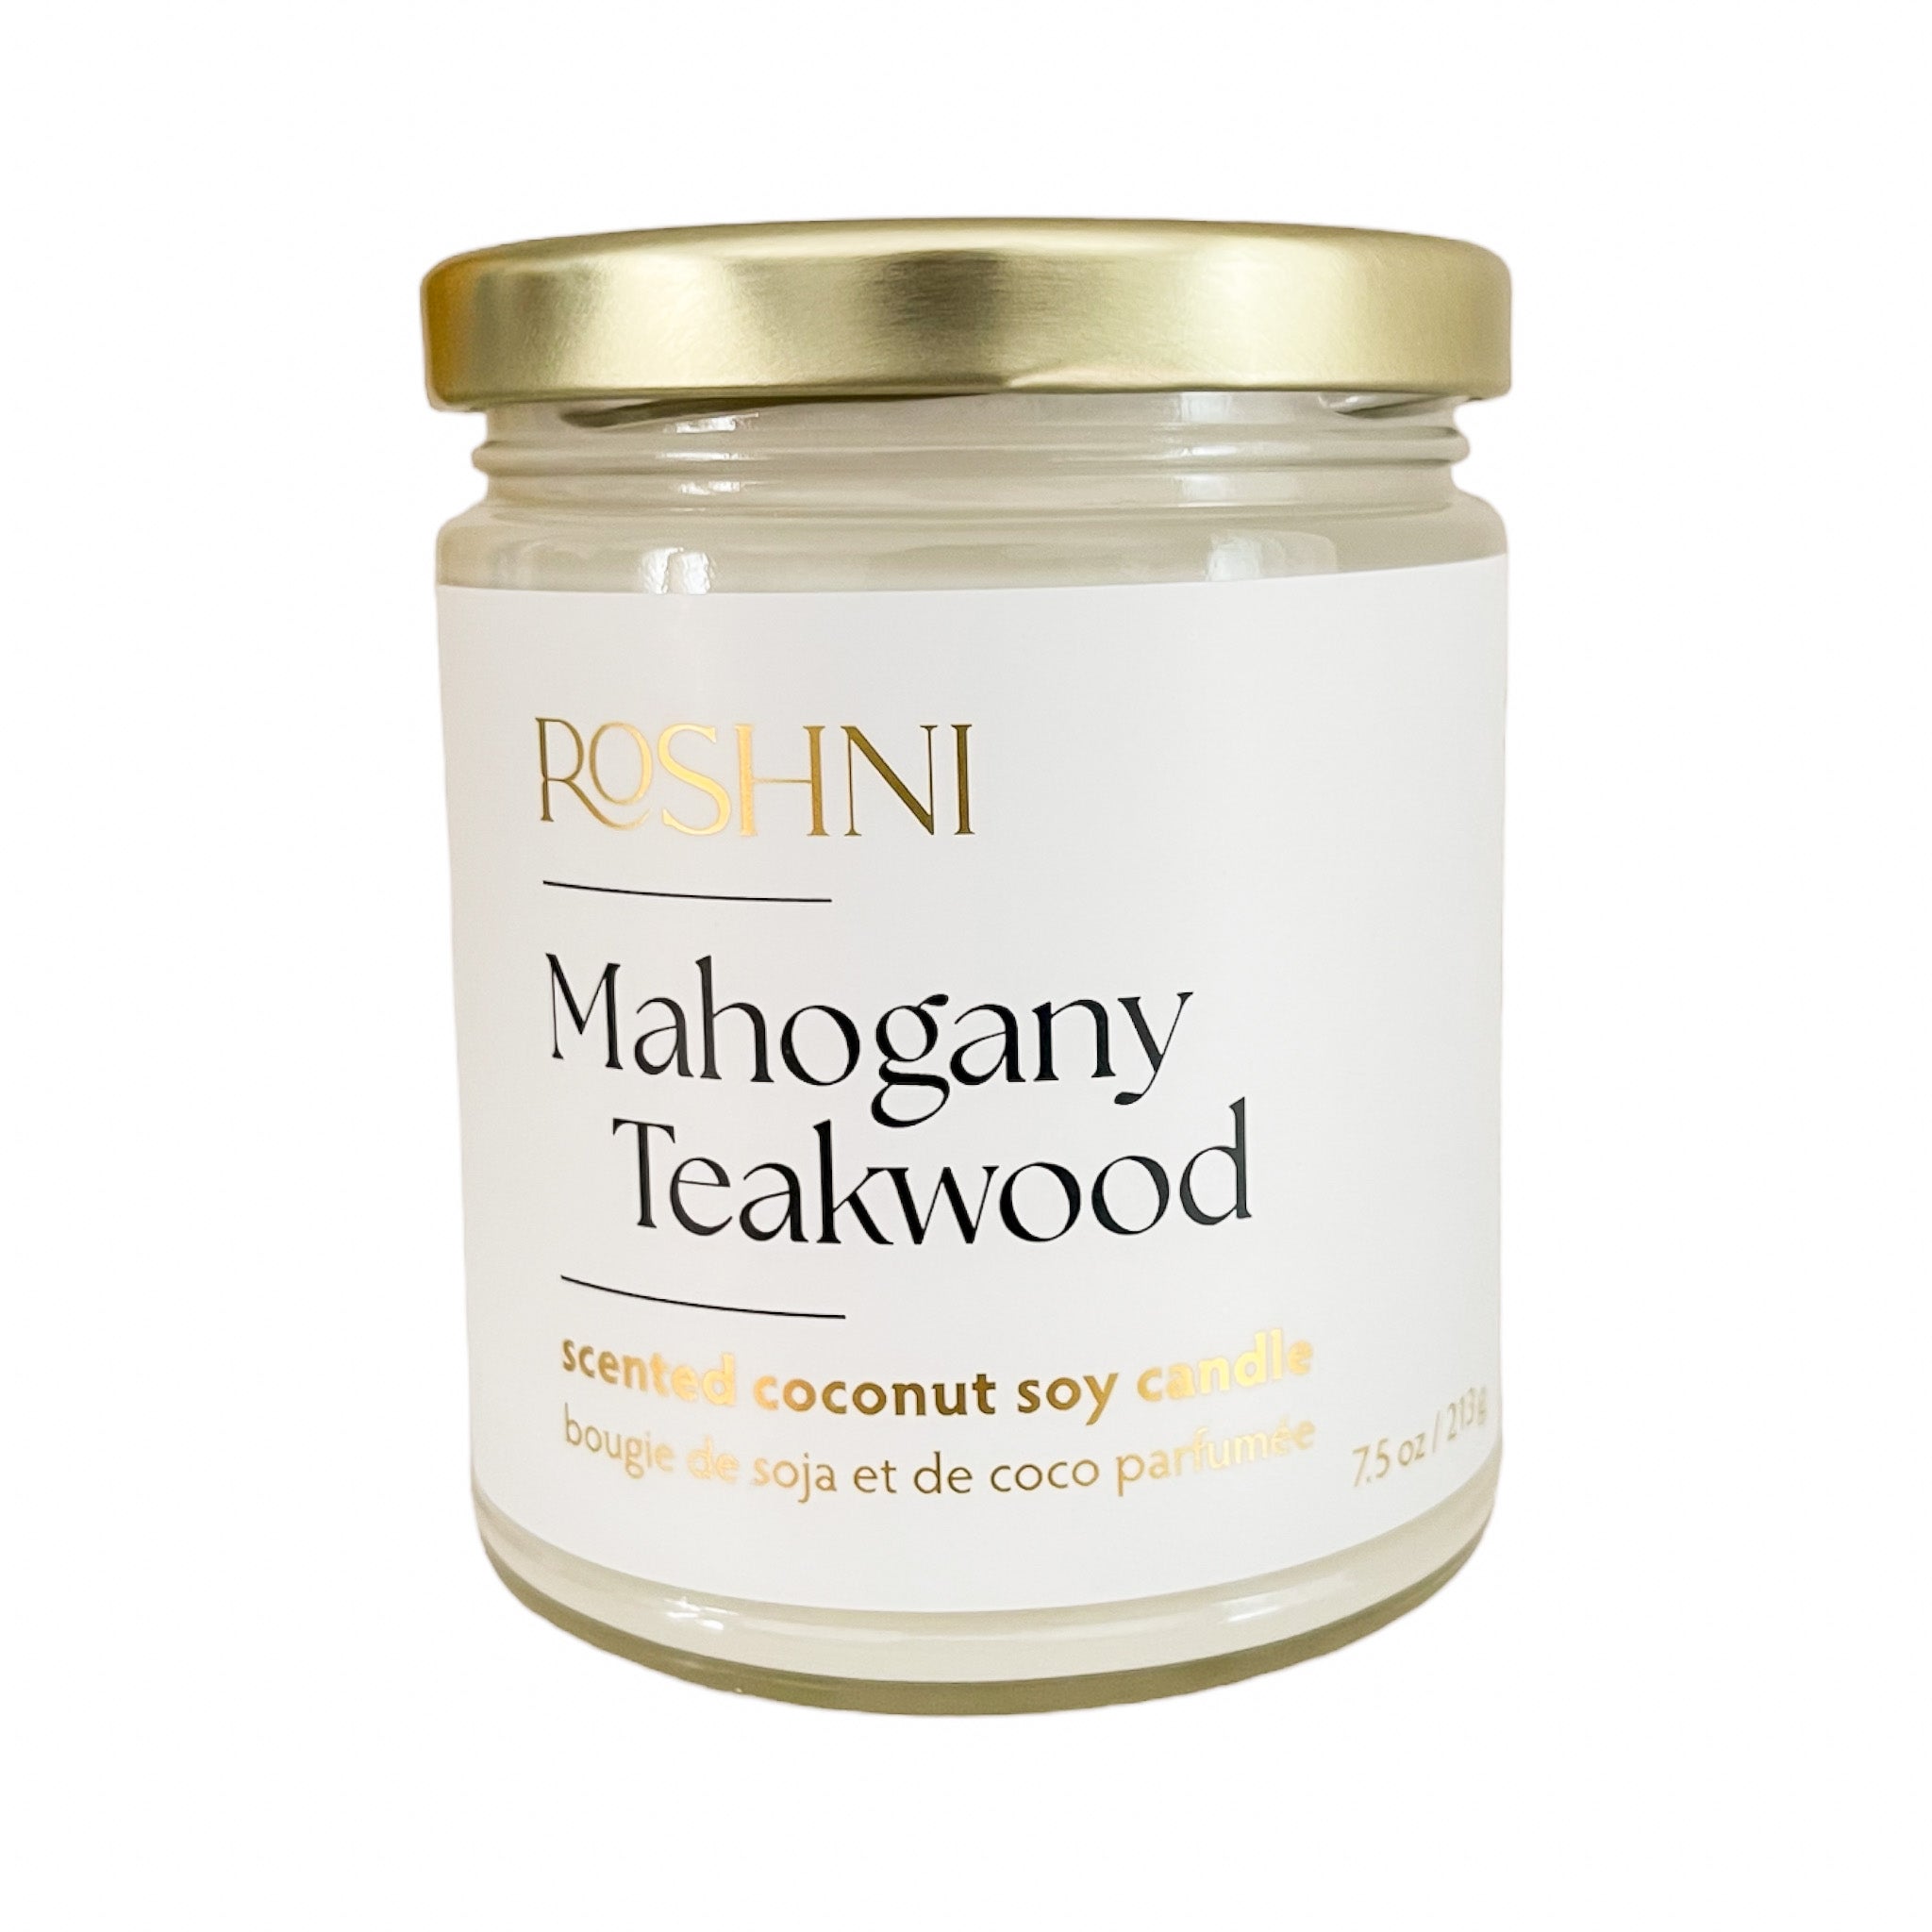 Mahogany Teakwood Soy Wax Candle Hand-poured Small Batches Scented